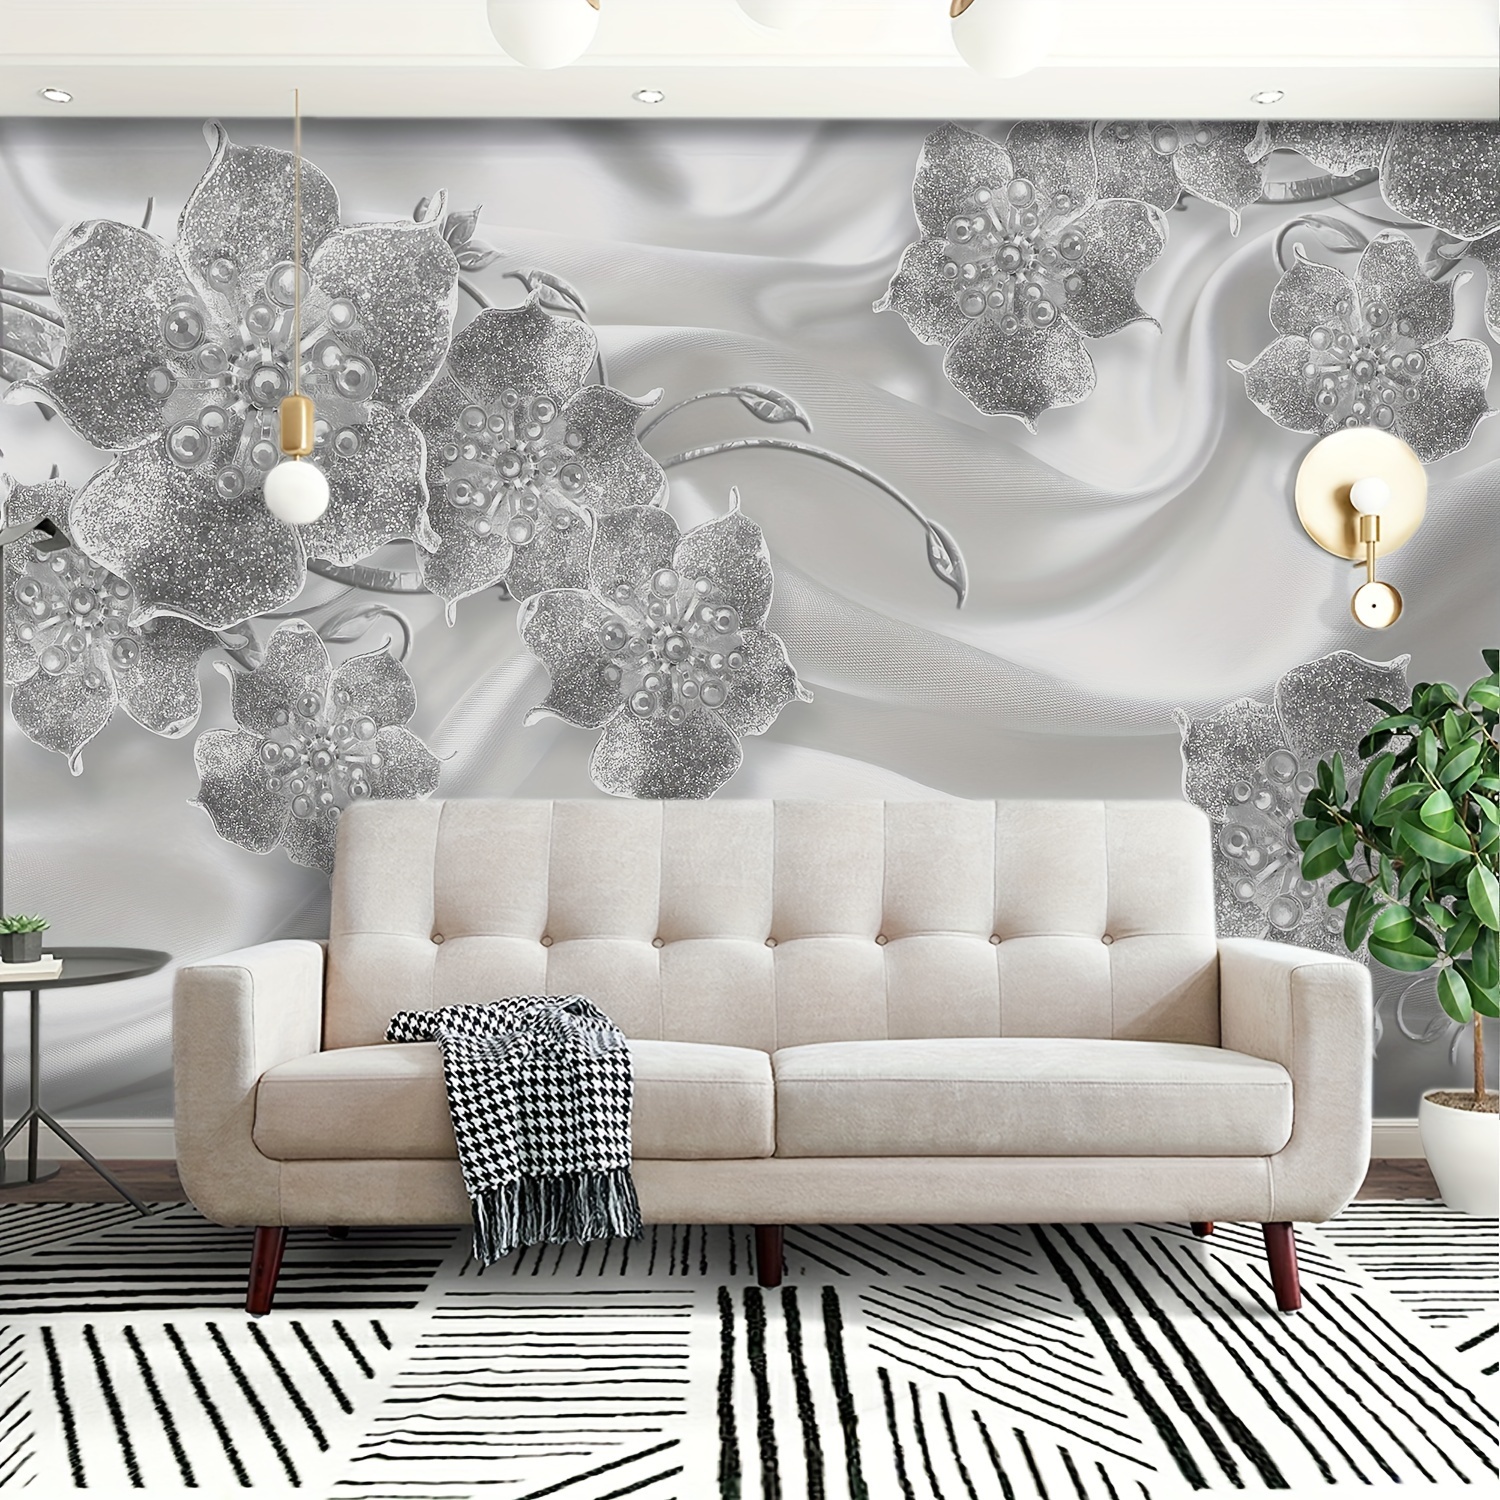 

Silver Floral 3d Wall Mural Wallpaper, Contemporary Pre-pasted Pvc Murals For Living Room Bedroom Decor, Semi-glossy Flower Pattern Art Wallpapers With Ripples, Single Use, Various Sizes